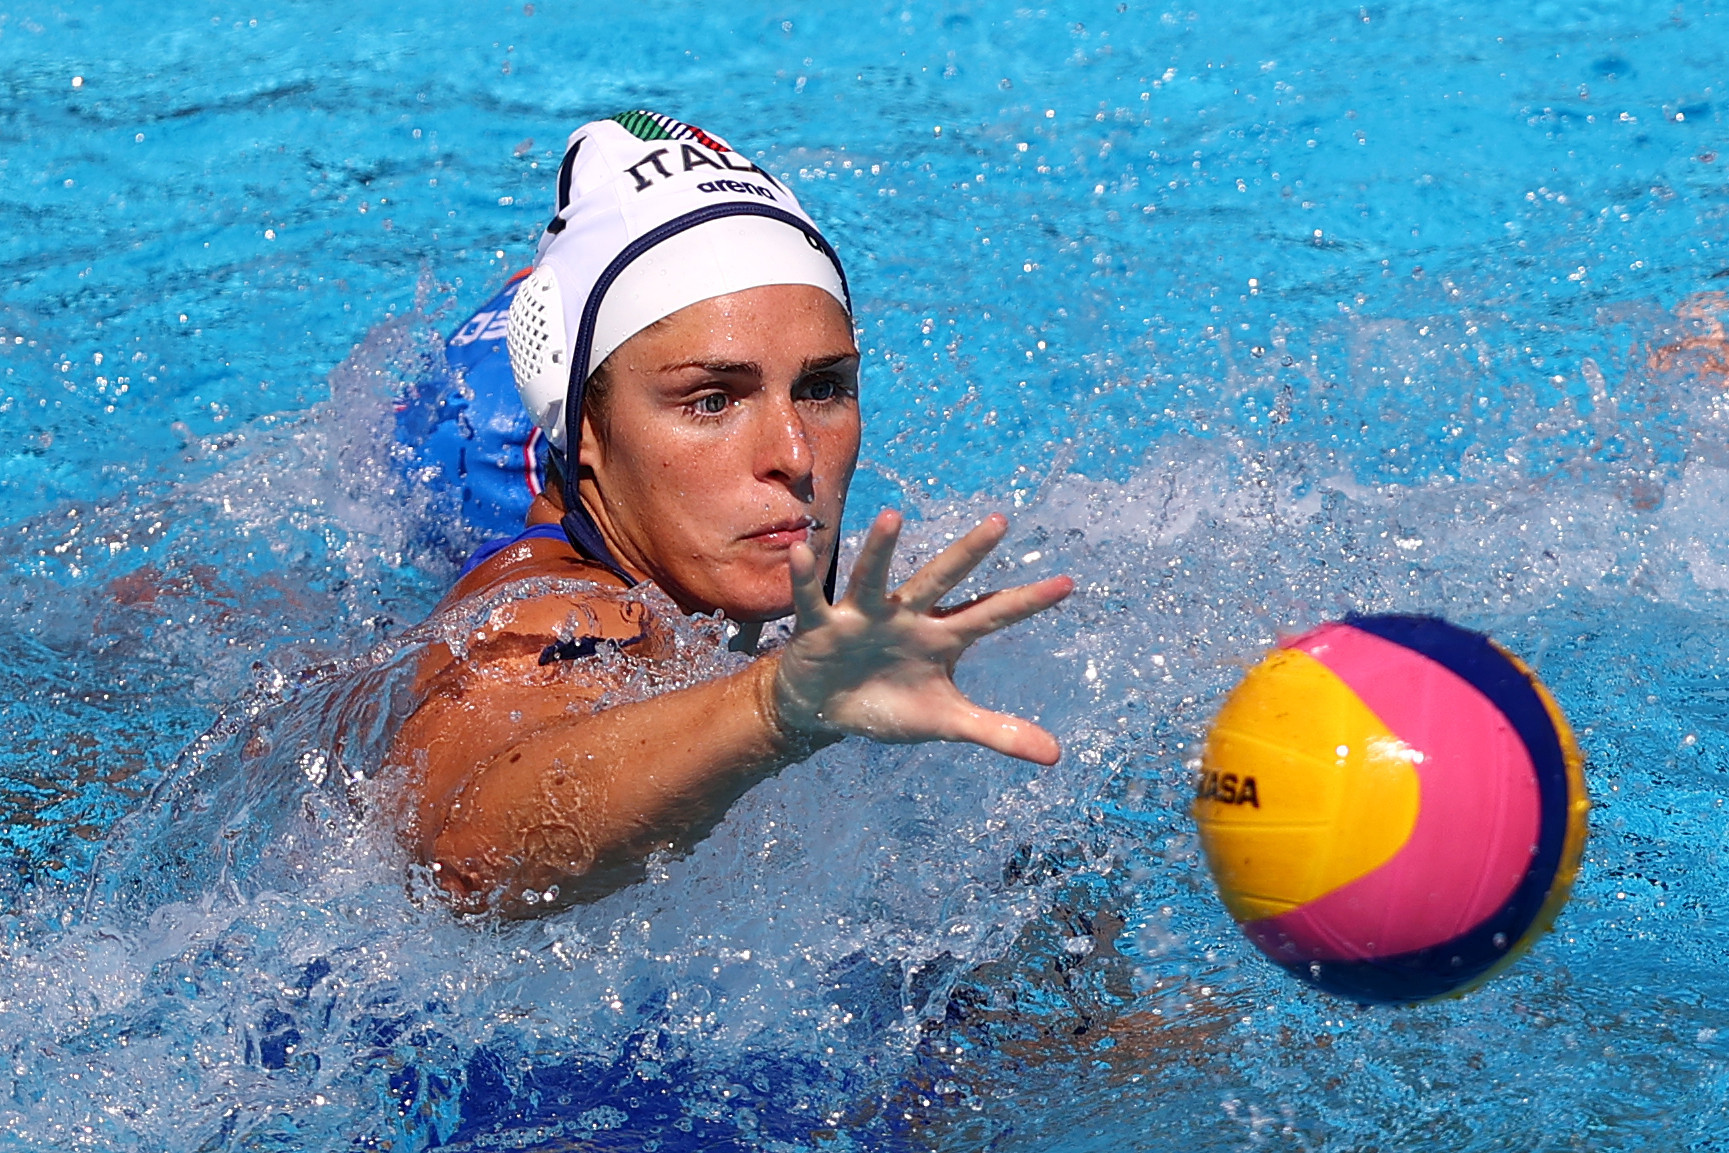 Italy recorded an inspired win over Spain today at the Women's European Water Polo Championship ©Getty Images